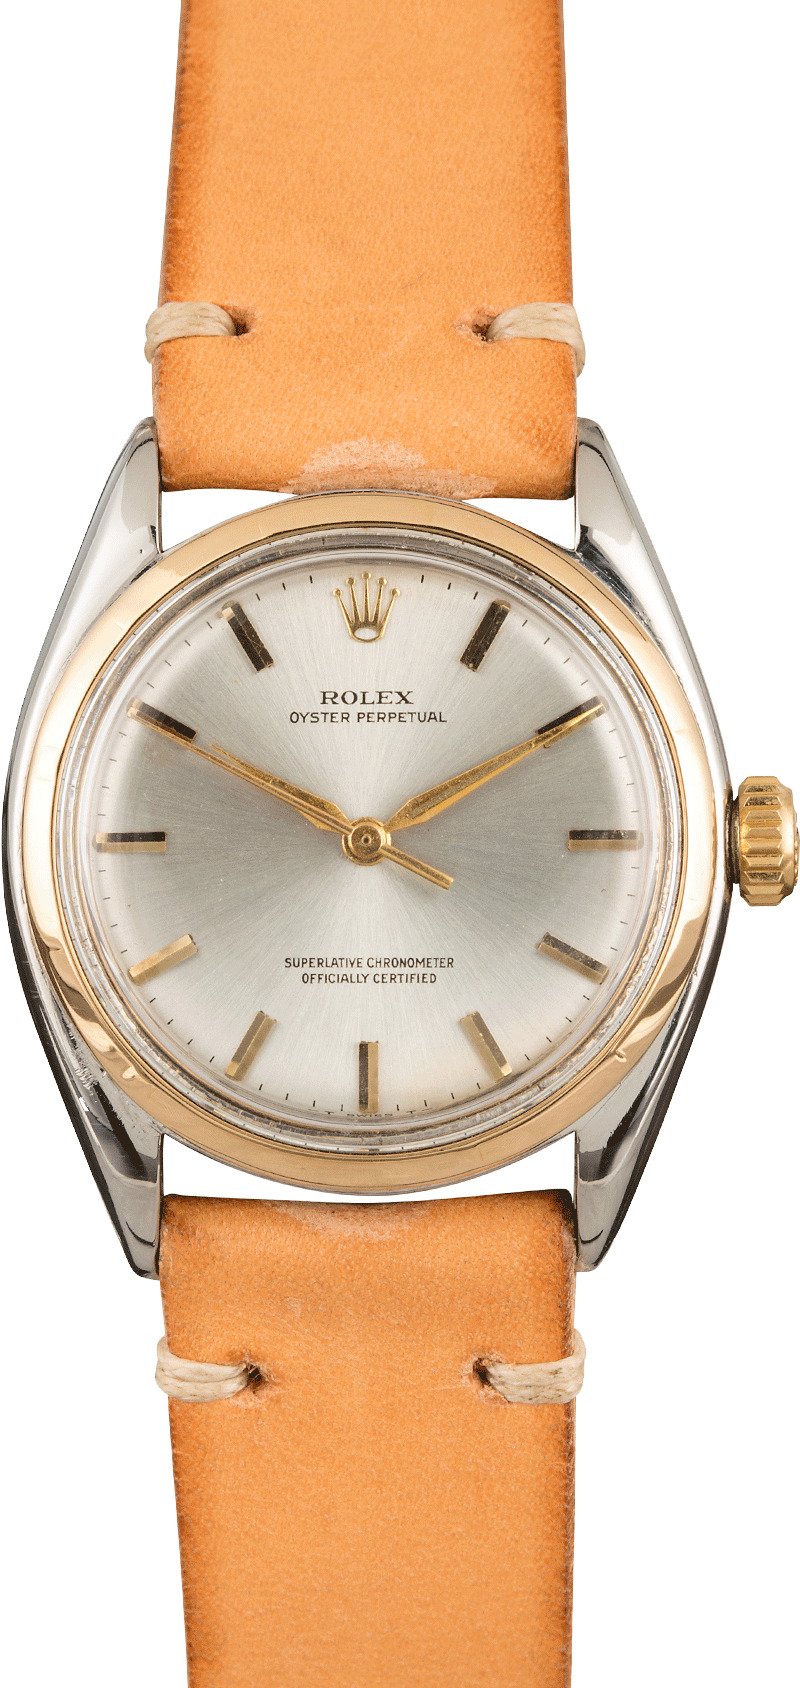 Vintage Rolex Oyster Perpetual at Bob's 